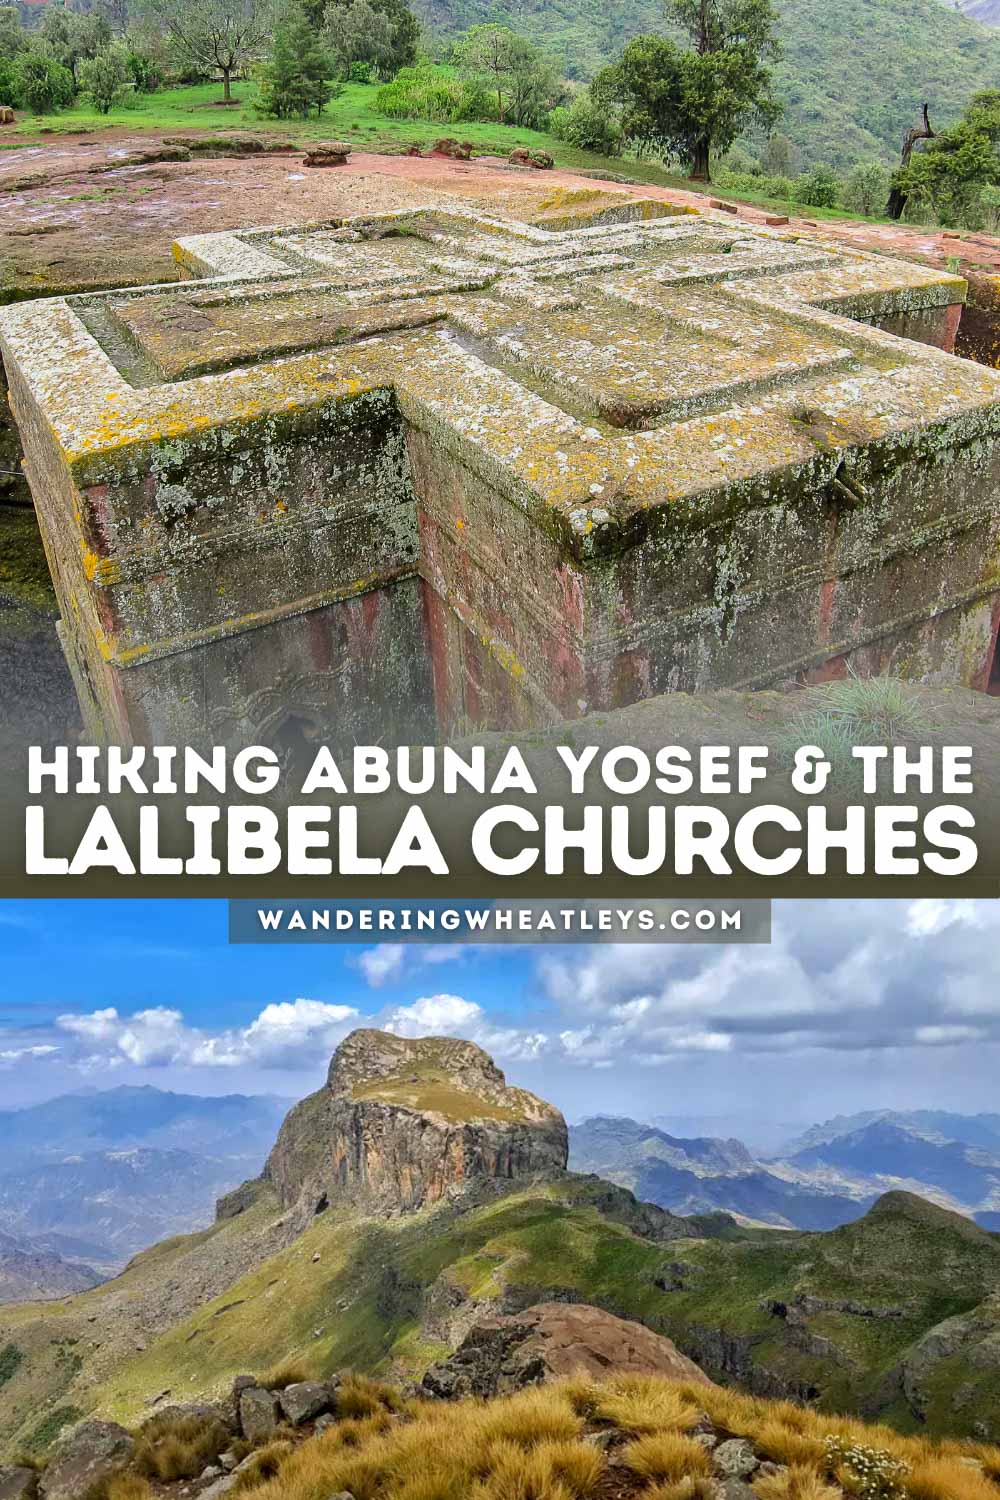 Guide to the Lalibela Churches